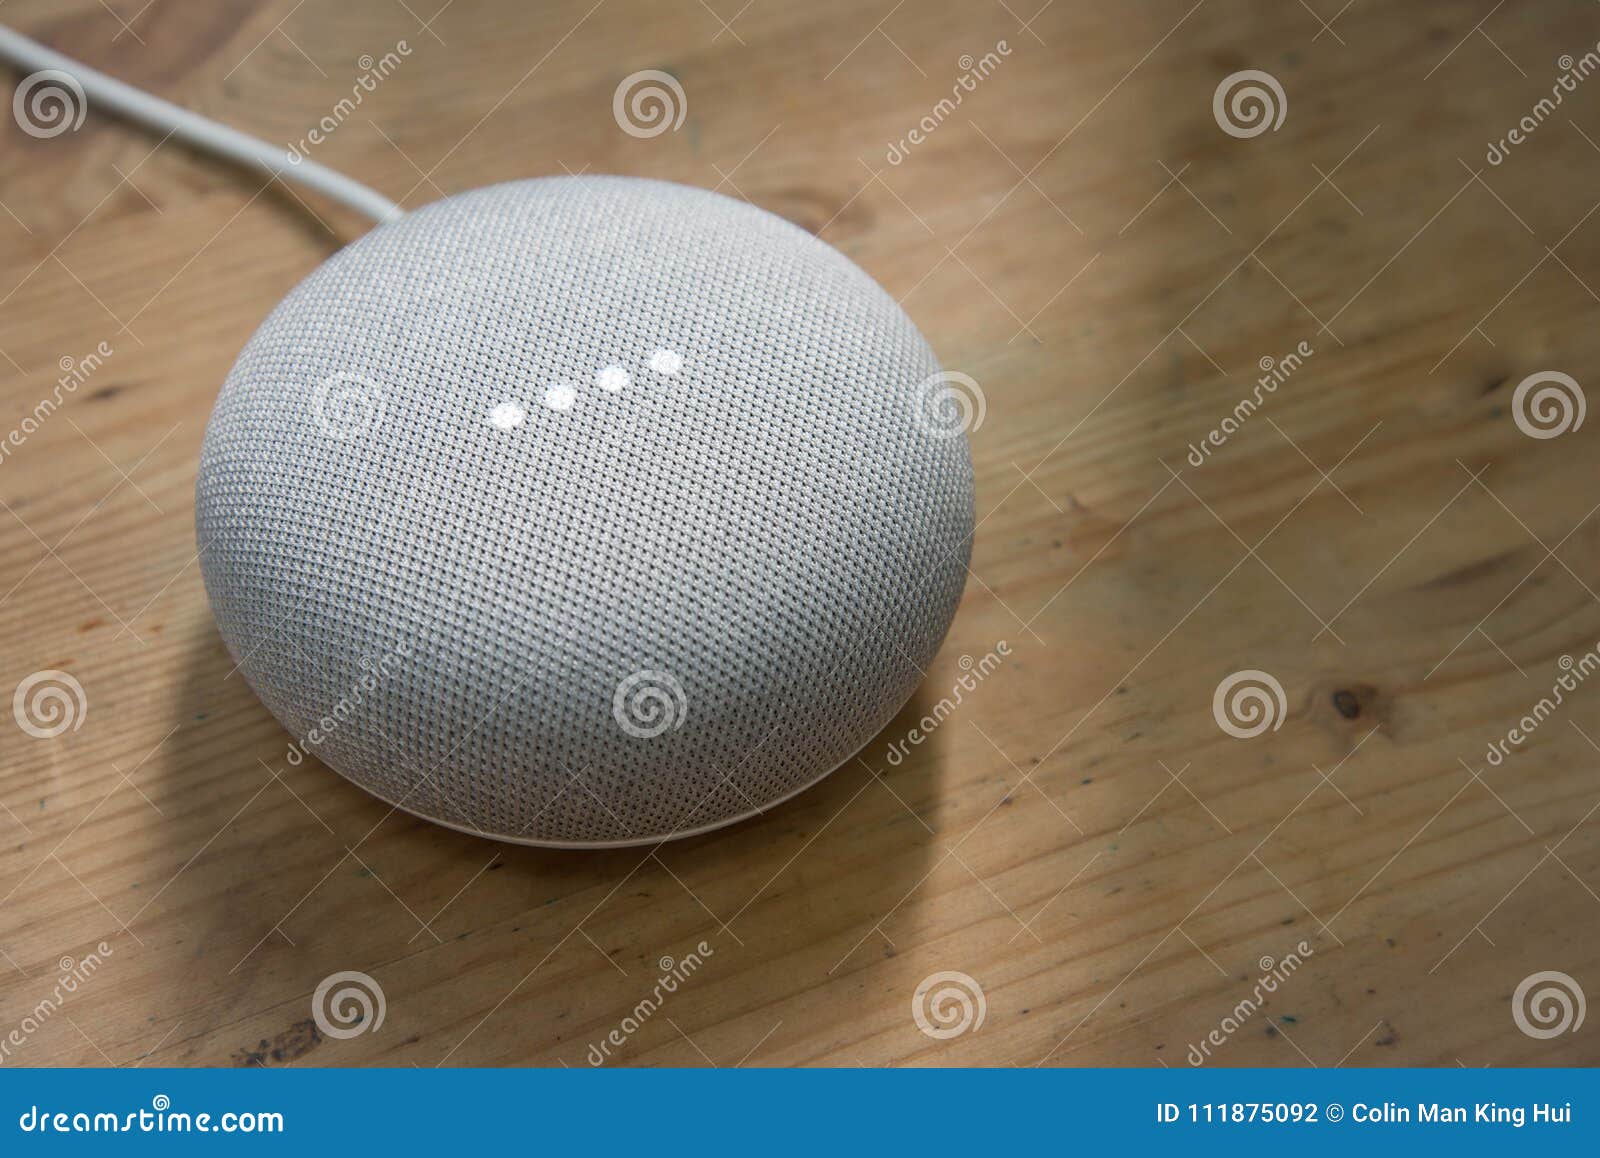 275 Google Home Mini Photos - Free  Royalty-Free Stock Photos from  Dreamstime